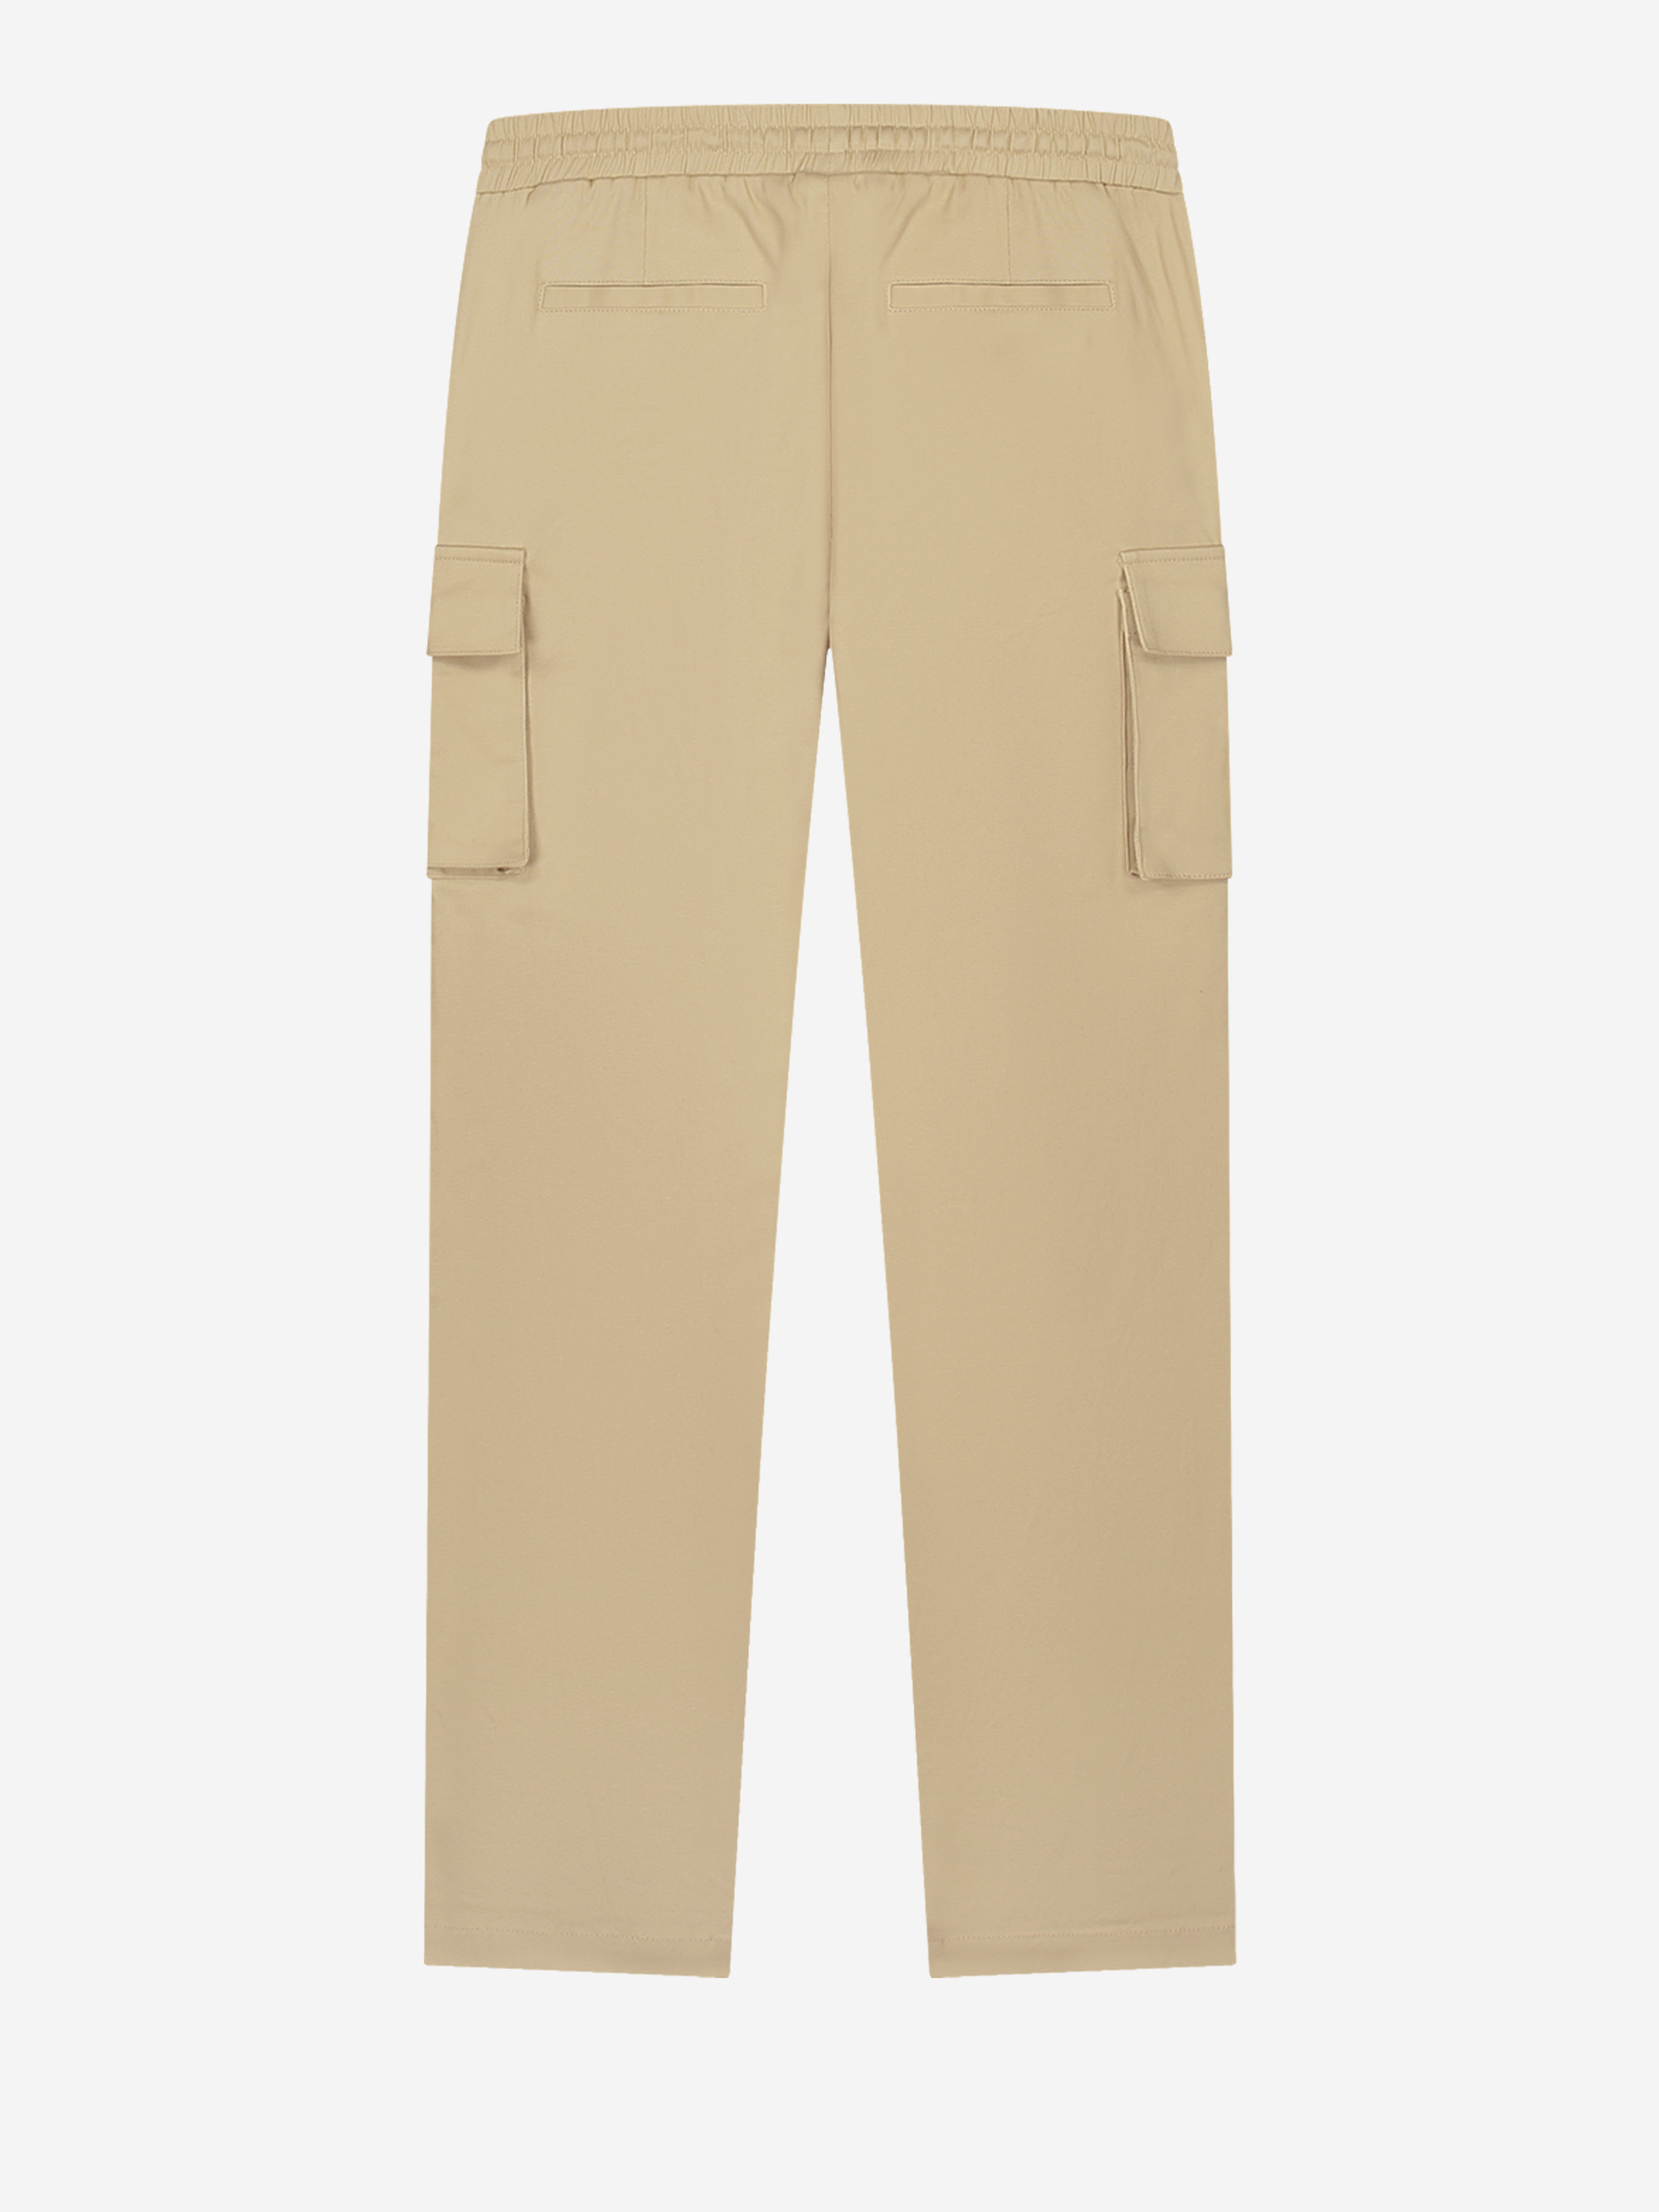 Utility pants with cord